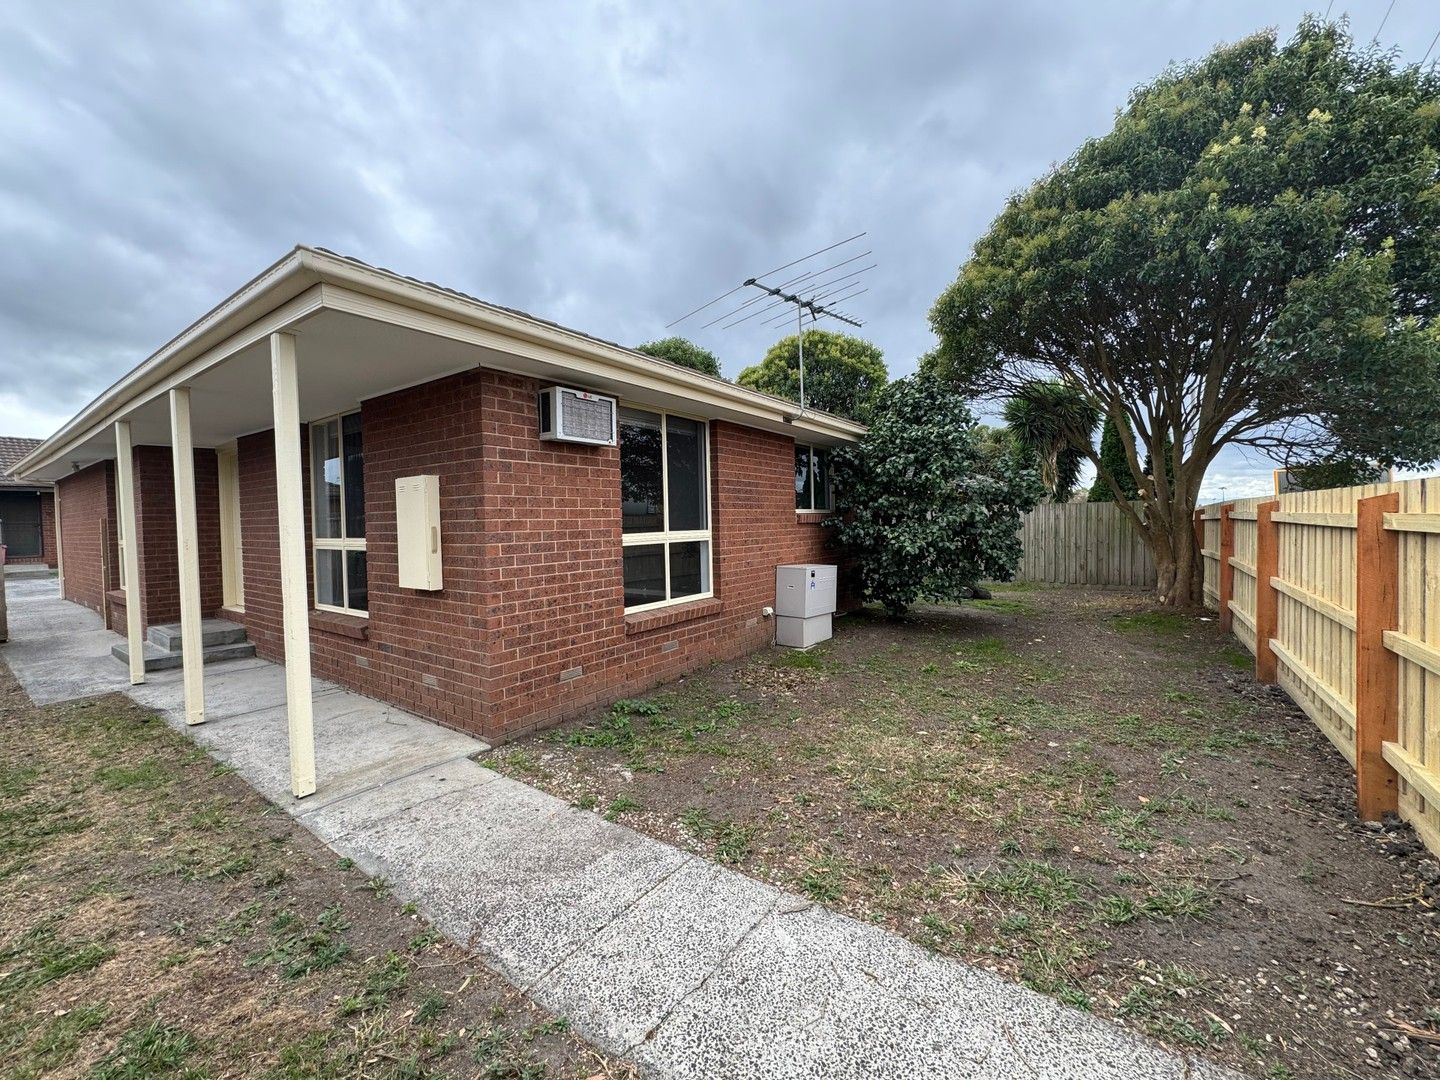 3 bedrooms Block of Units in 3/15 Lecky Street CRANBOURNE EAST VIC, 3977